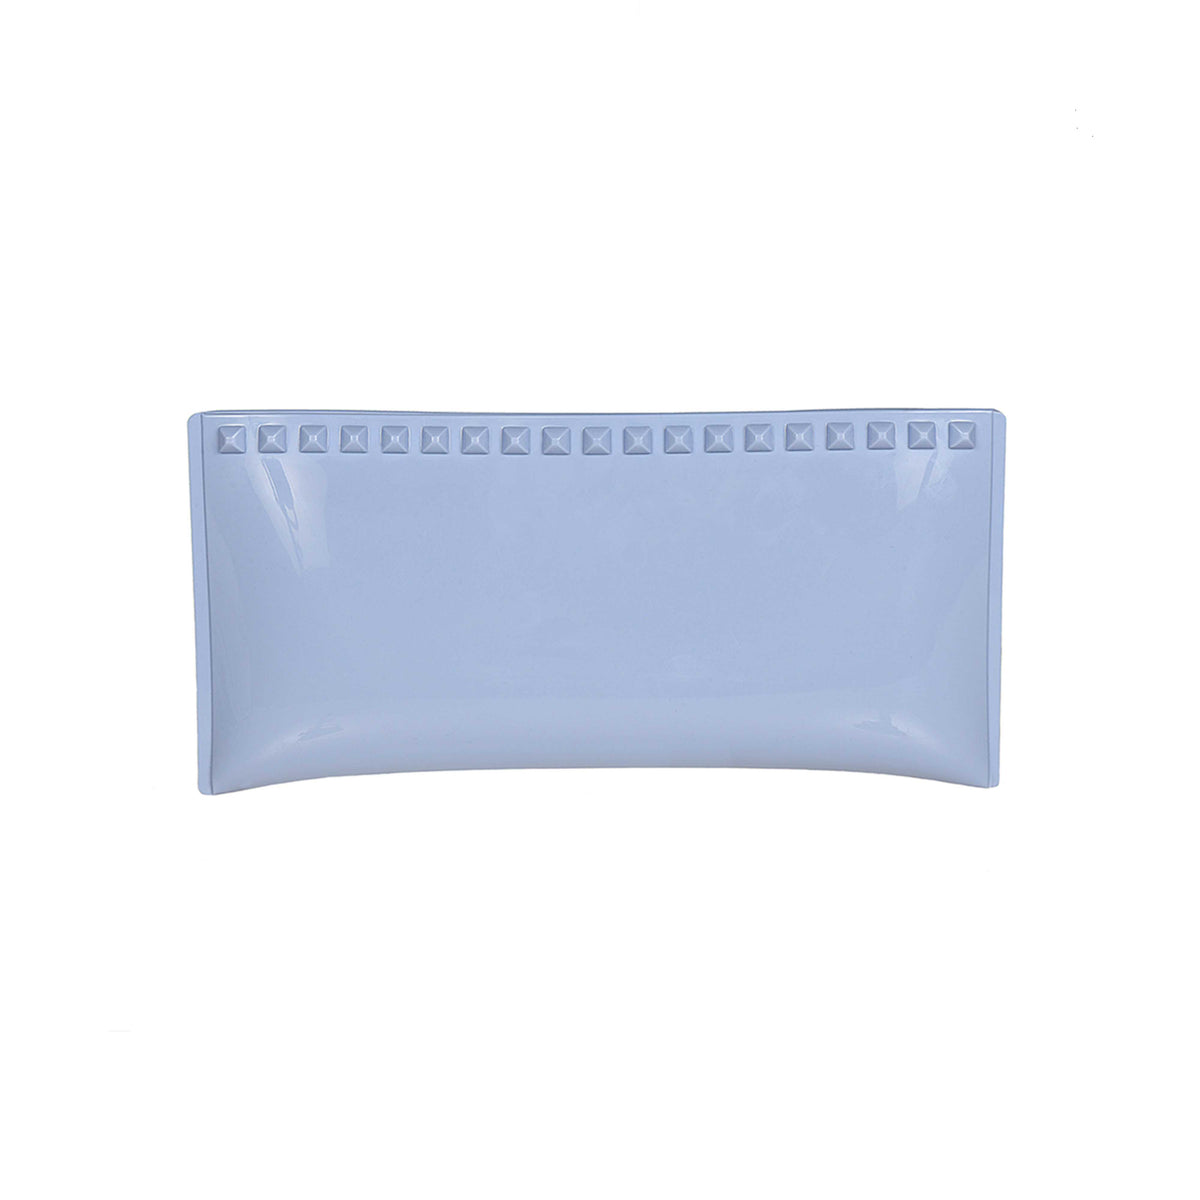 Waterproof jelly bags with studded design in color baby blue